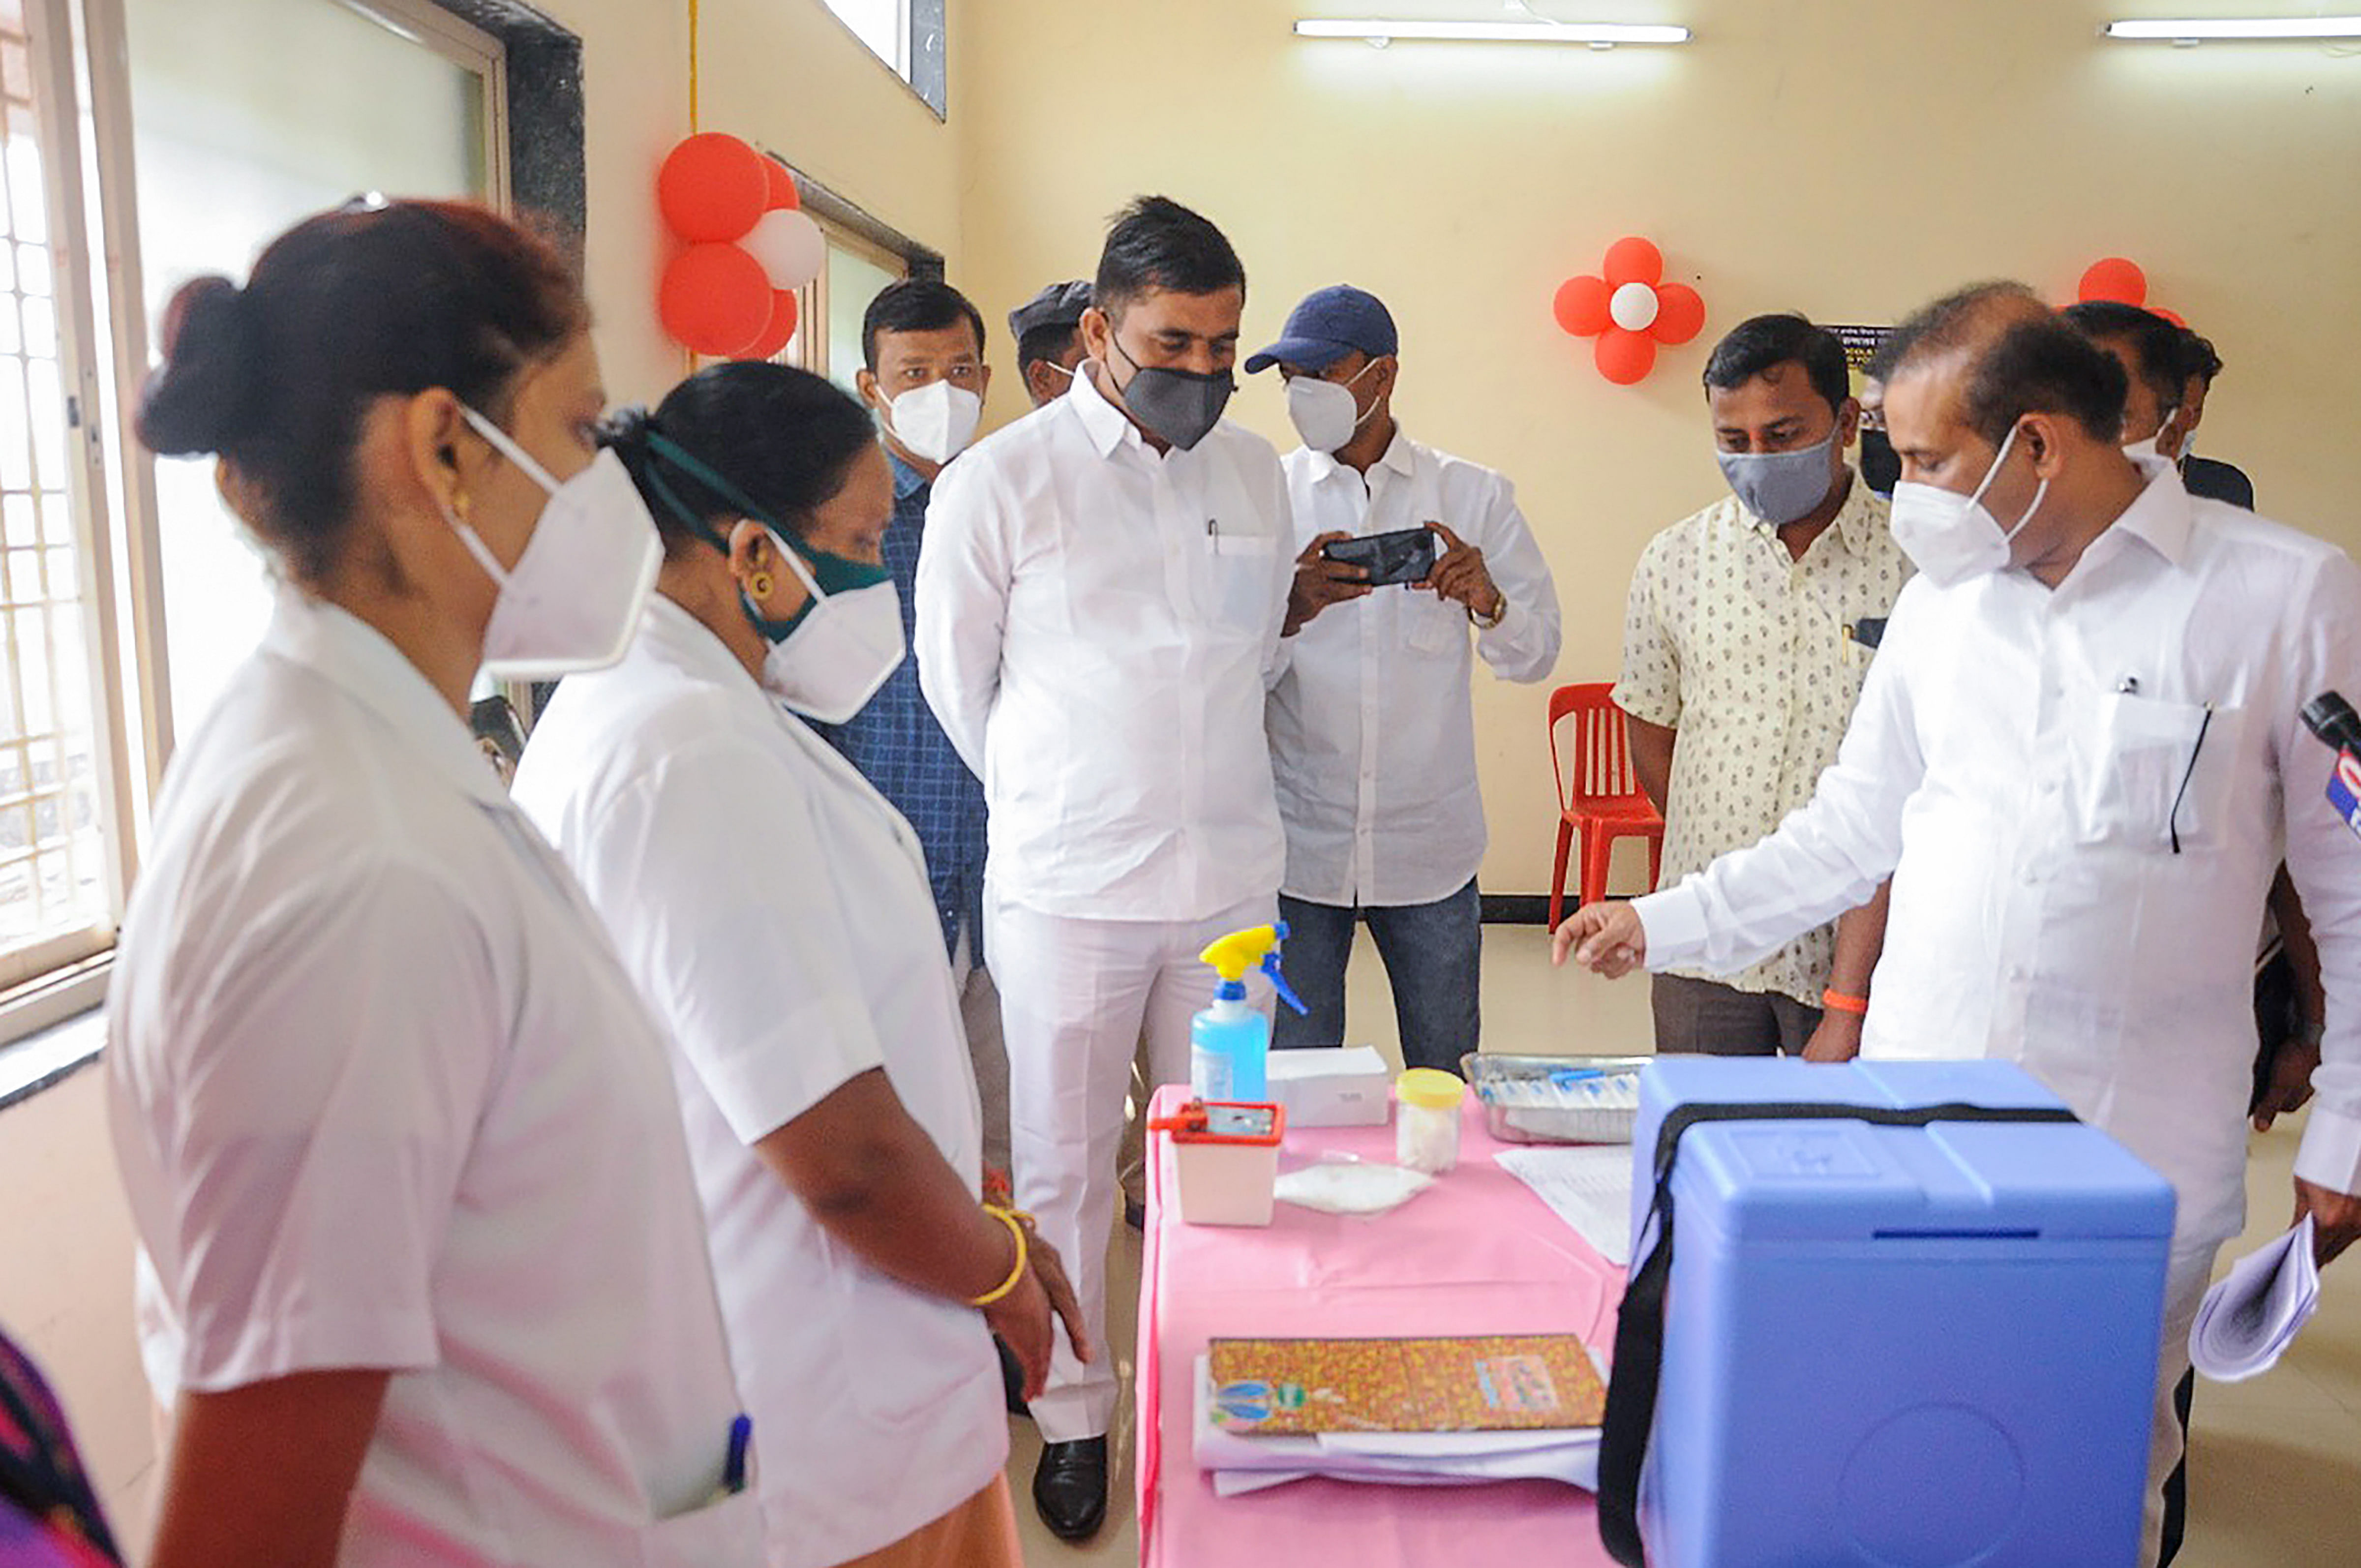 Maharashtra Health Minister Rajesh Tope attends the COVID-19 vaccine trial program (dry run), at a centre in Jalna, Saturday, Jan. 02, 2021. Credit: PTI Photo